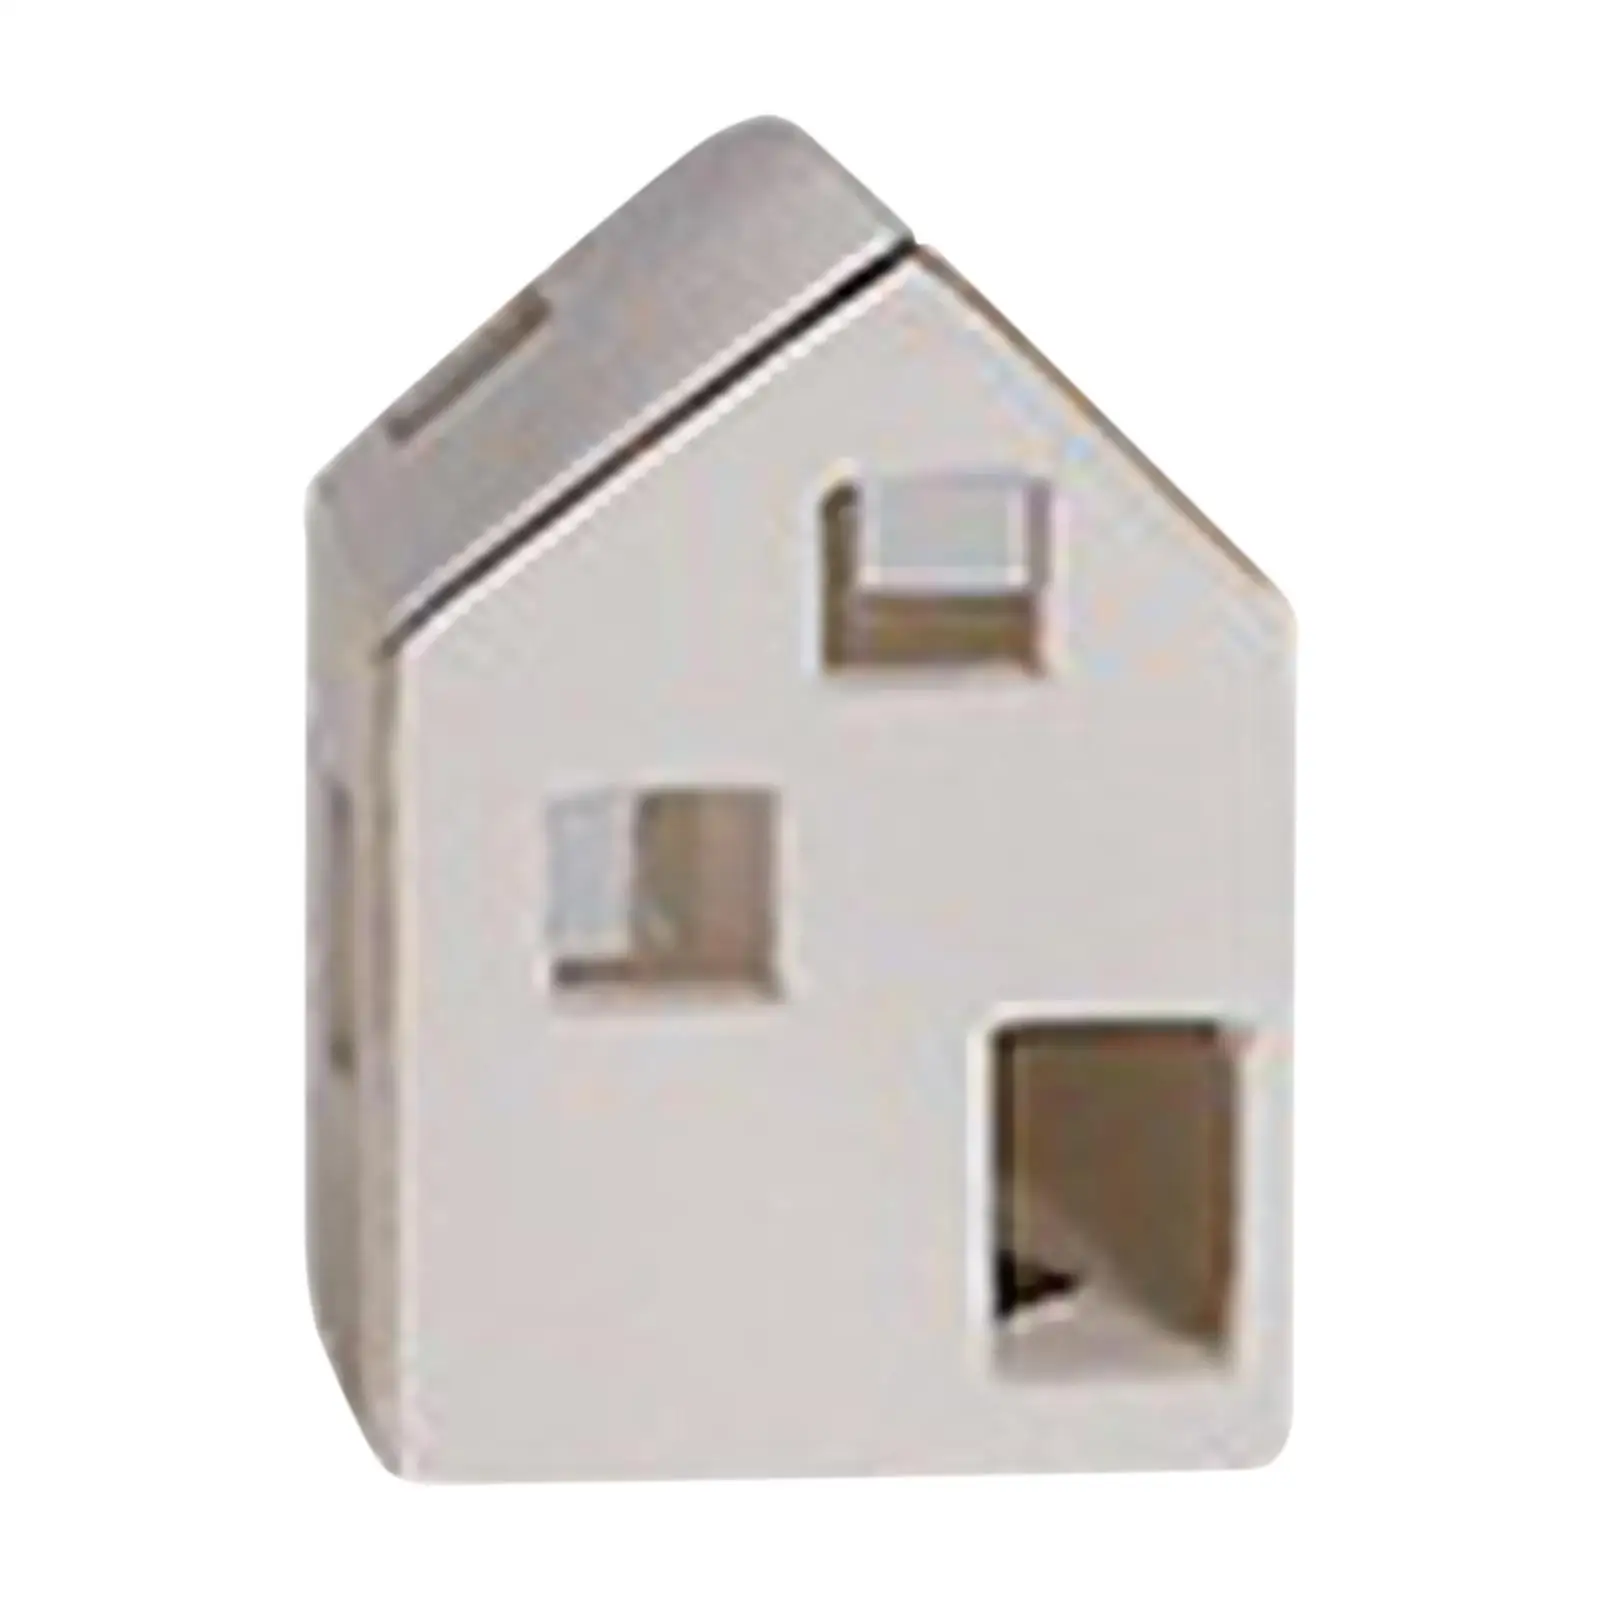 Ceramic Candle Holder Home Decor Small House Shaped Figurines Ornament Taper Candle Holder for Celebrations Party